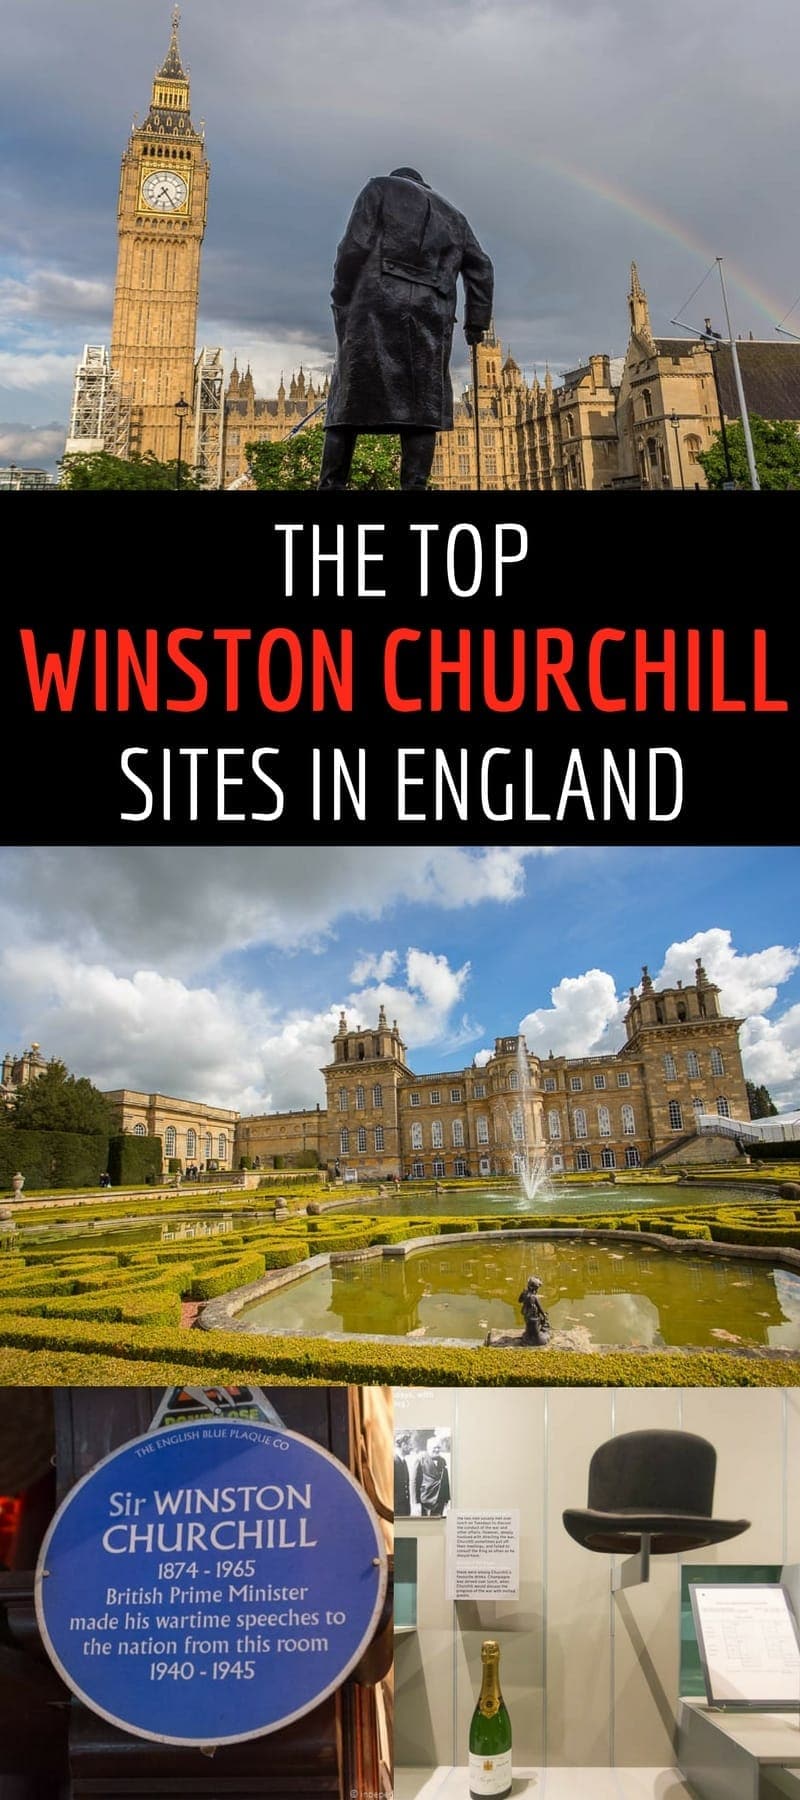 A guide to the top Winston Churchill sites in England, including Blenheim Palace, Chartwell, Bladon, St. Margaret's Church, and several other Churchill sites in London. Article explains the Winston Churchill connection and provides tips & travel advice for visiting each site.